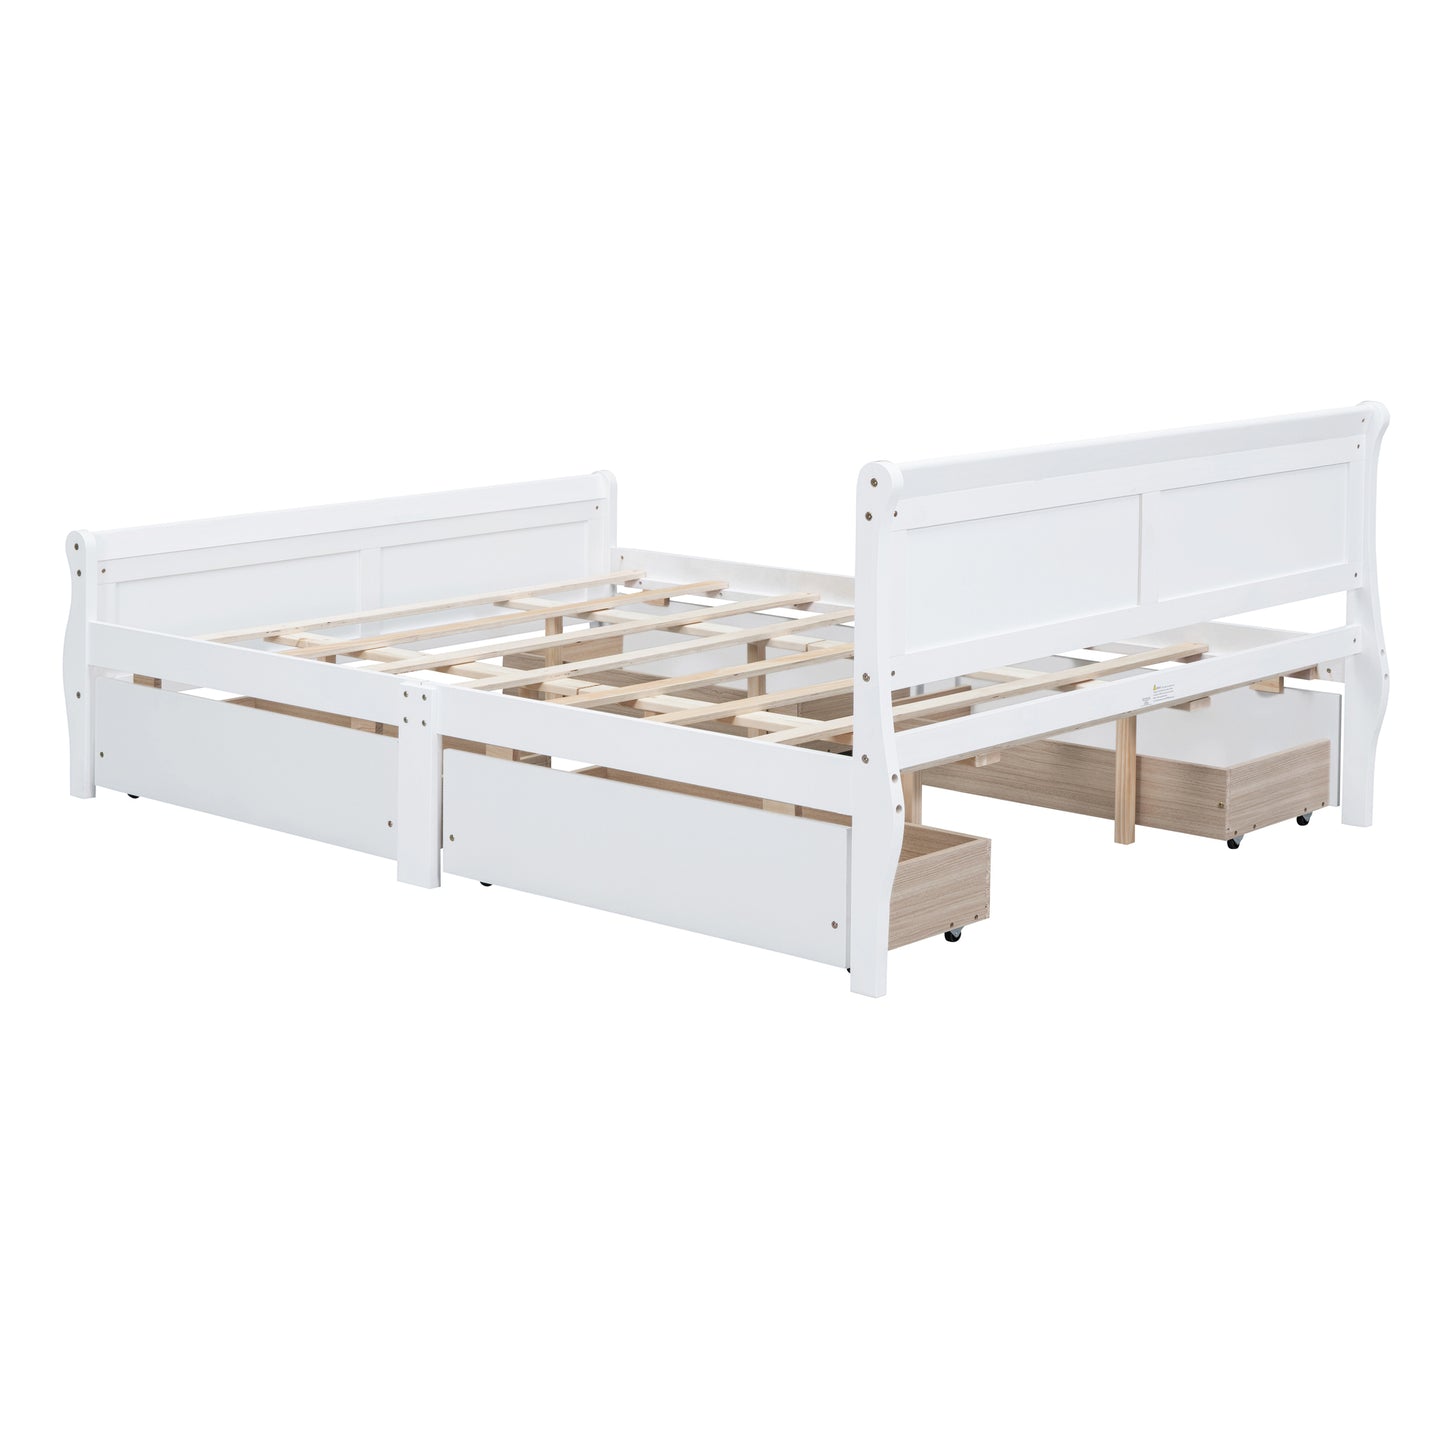 Queen Size Wood Platform Bed with 4 Drawers and Streamlined Headboard & Footboard, White